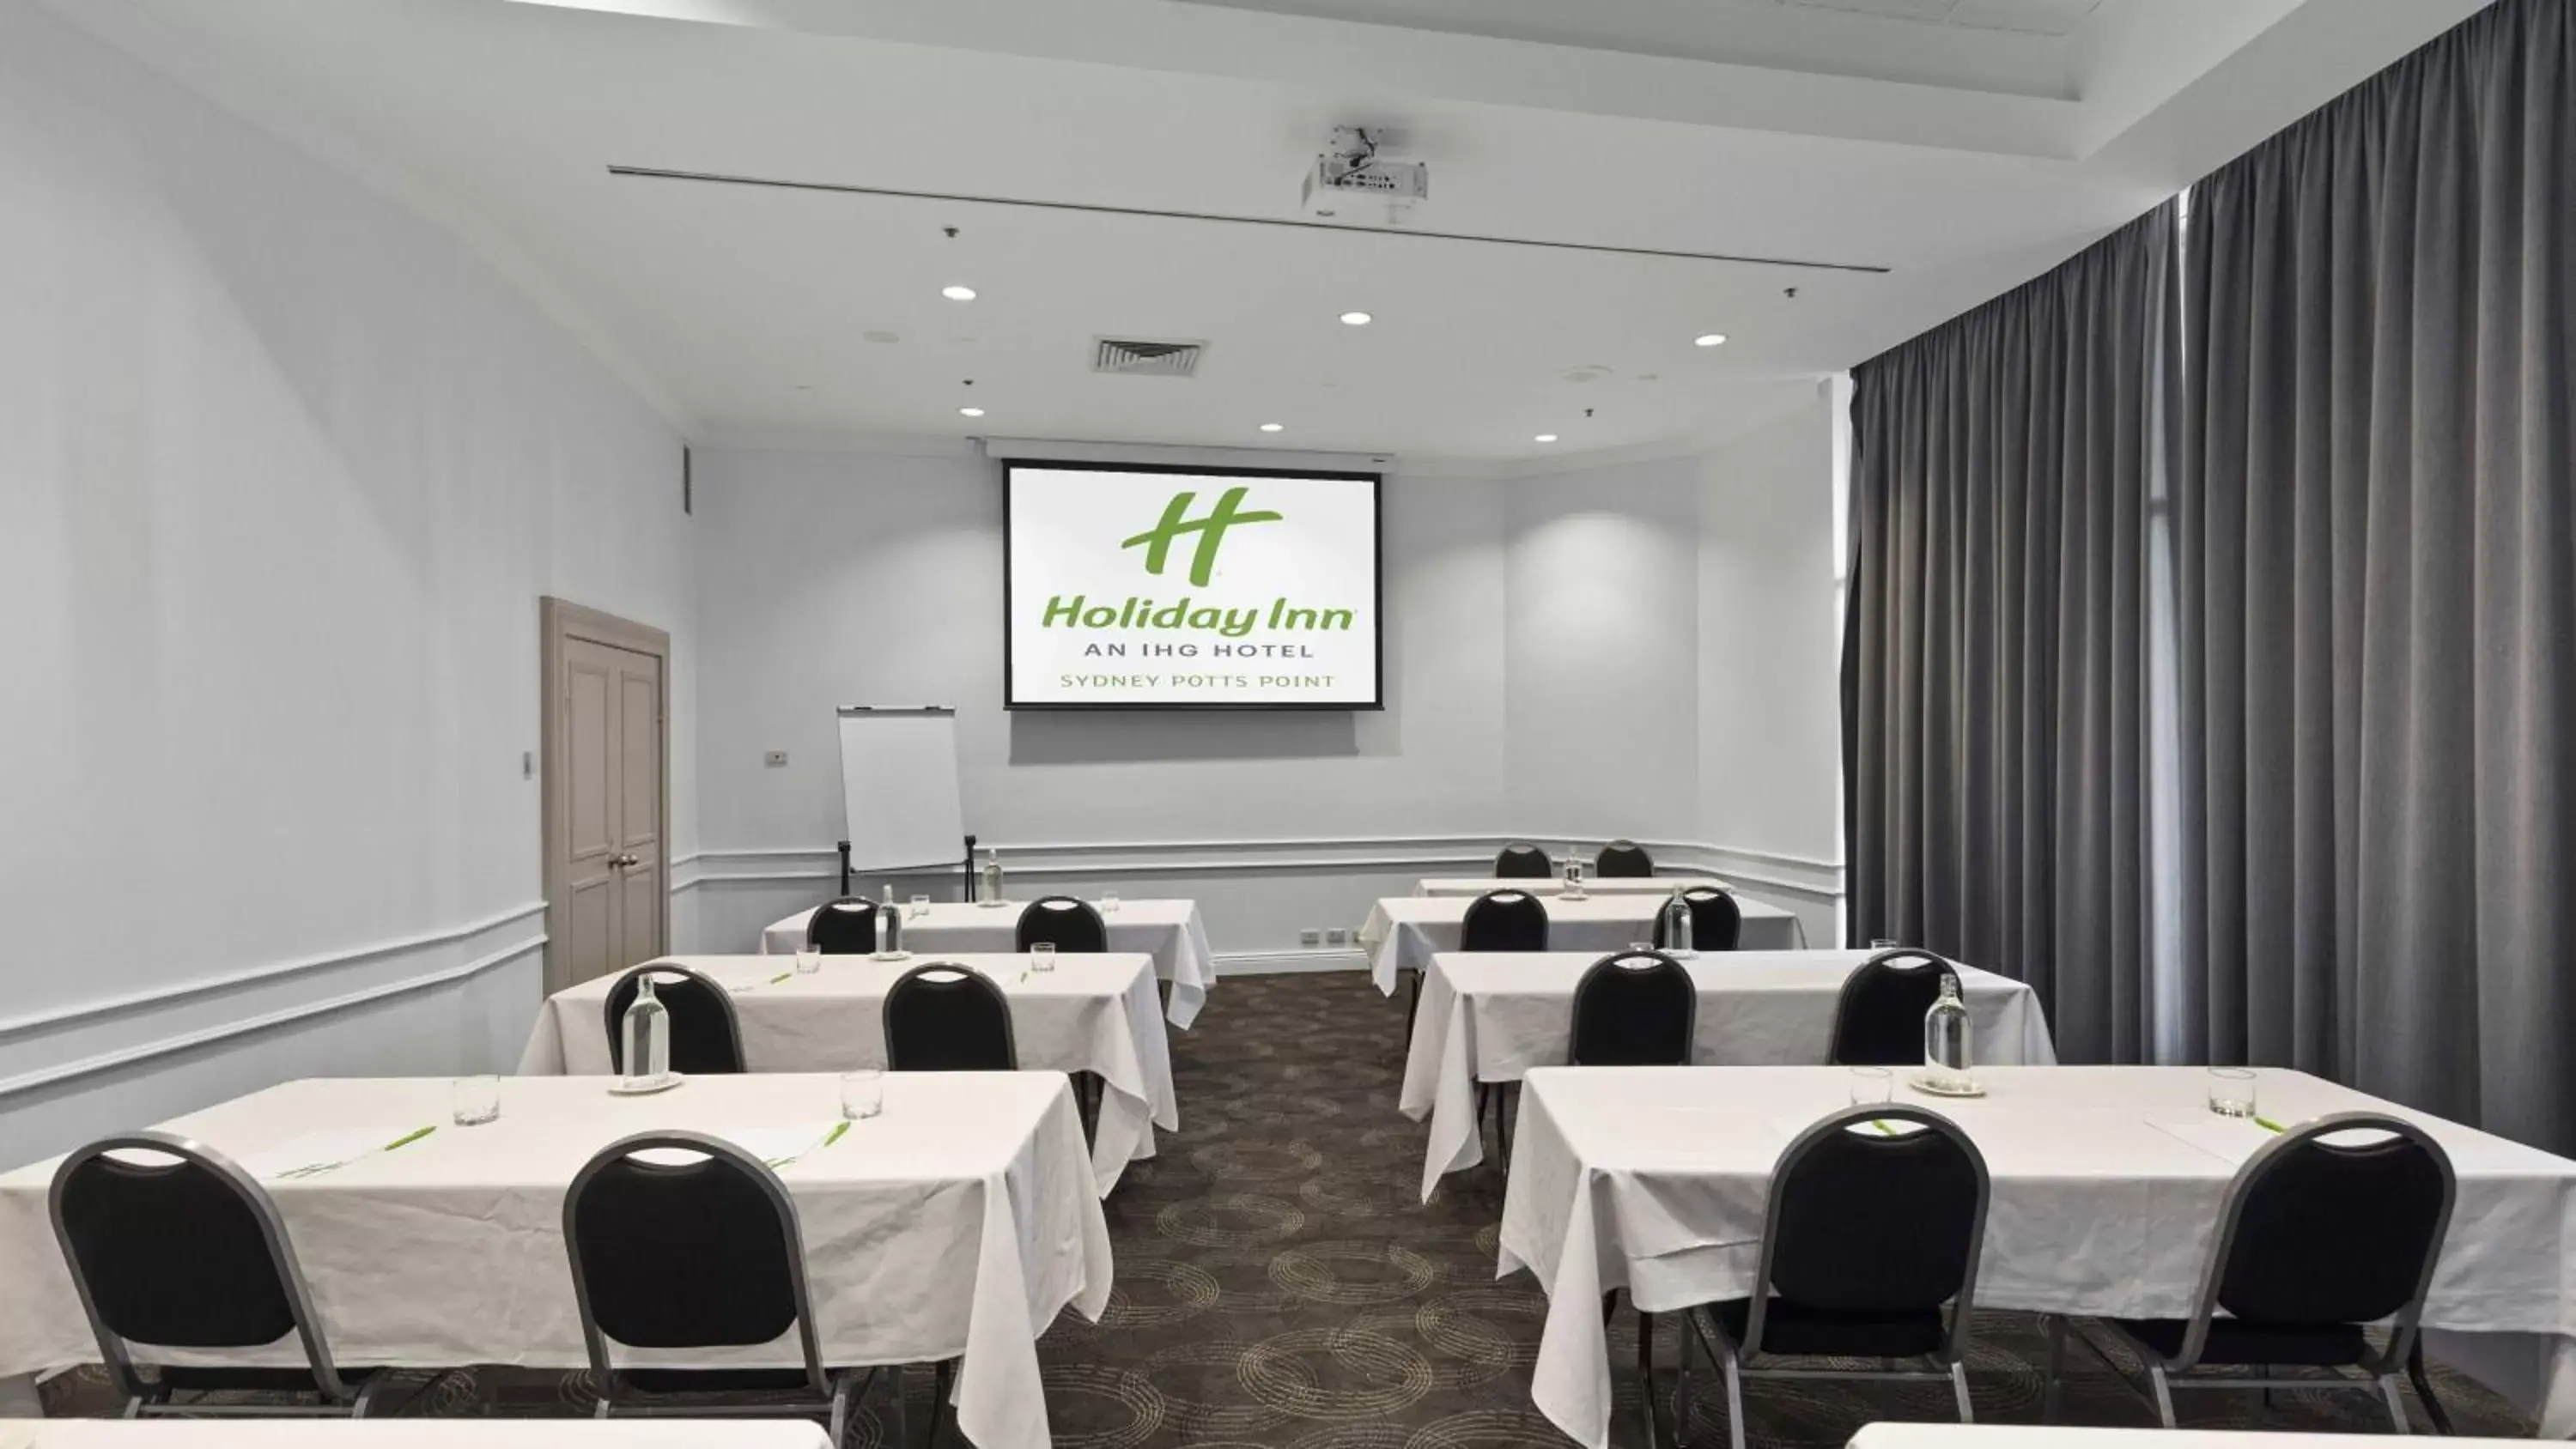 Meeting/conference room in Holiday Inn Sydney Potts Point